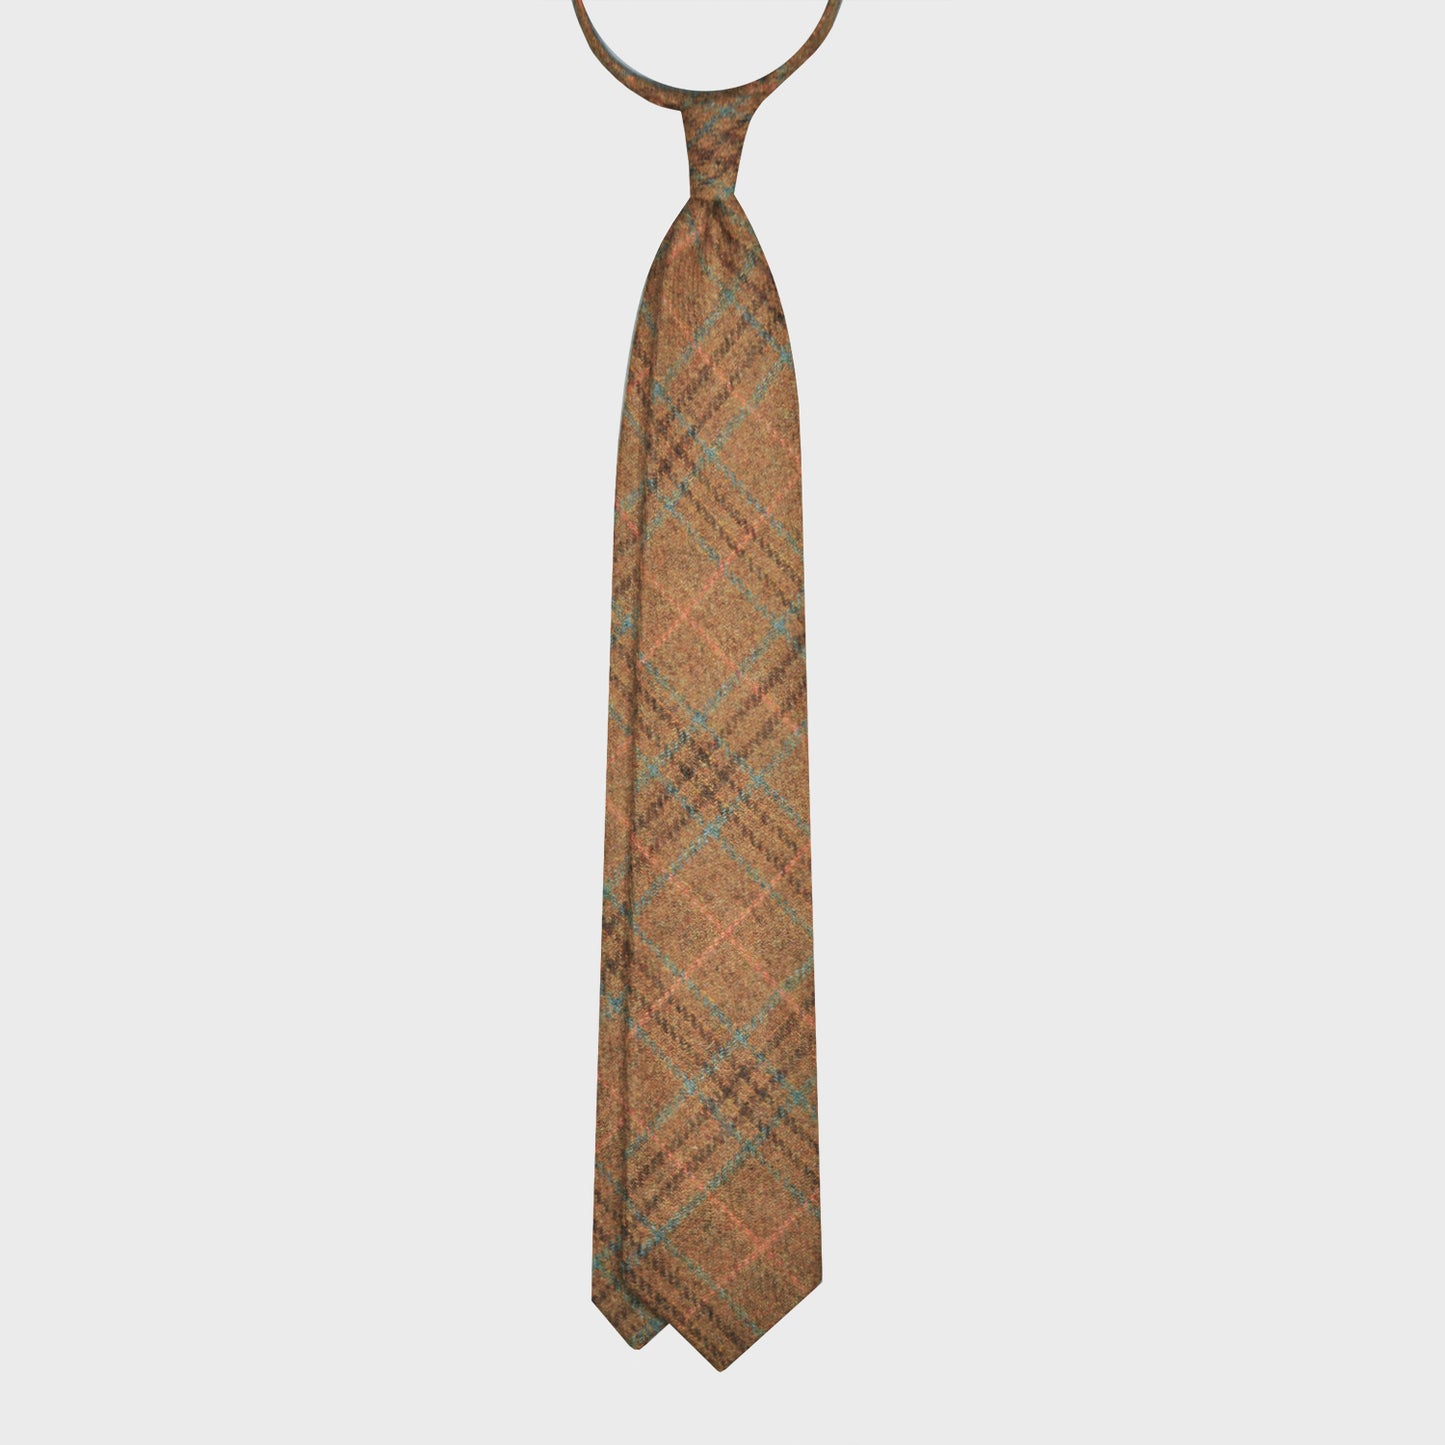 Load image into Gallery viewer, F.Marino Tweed Tie 3 Folds Glen Plaid Copper Brown-Wools Boutique Uomo
